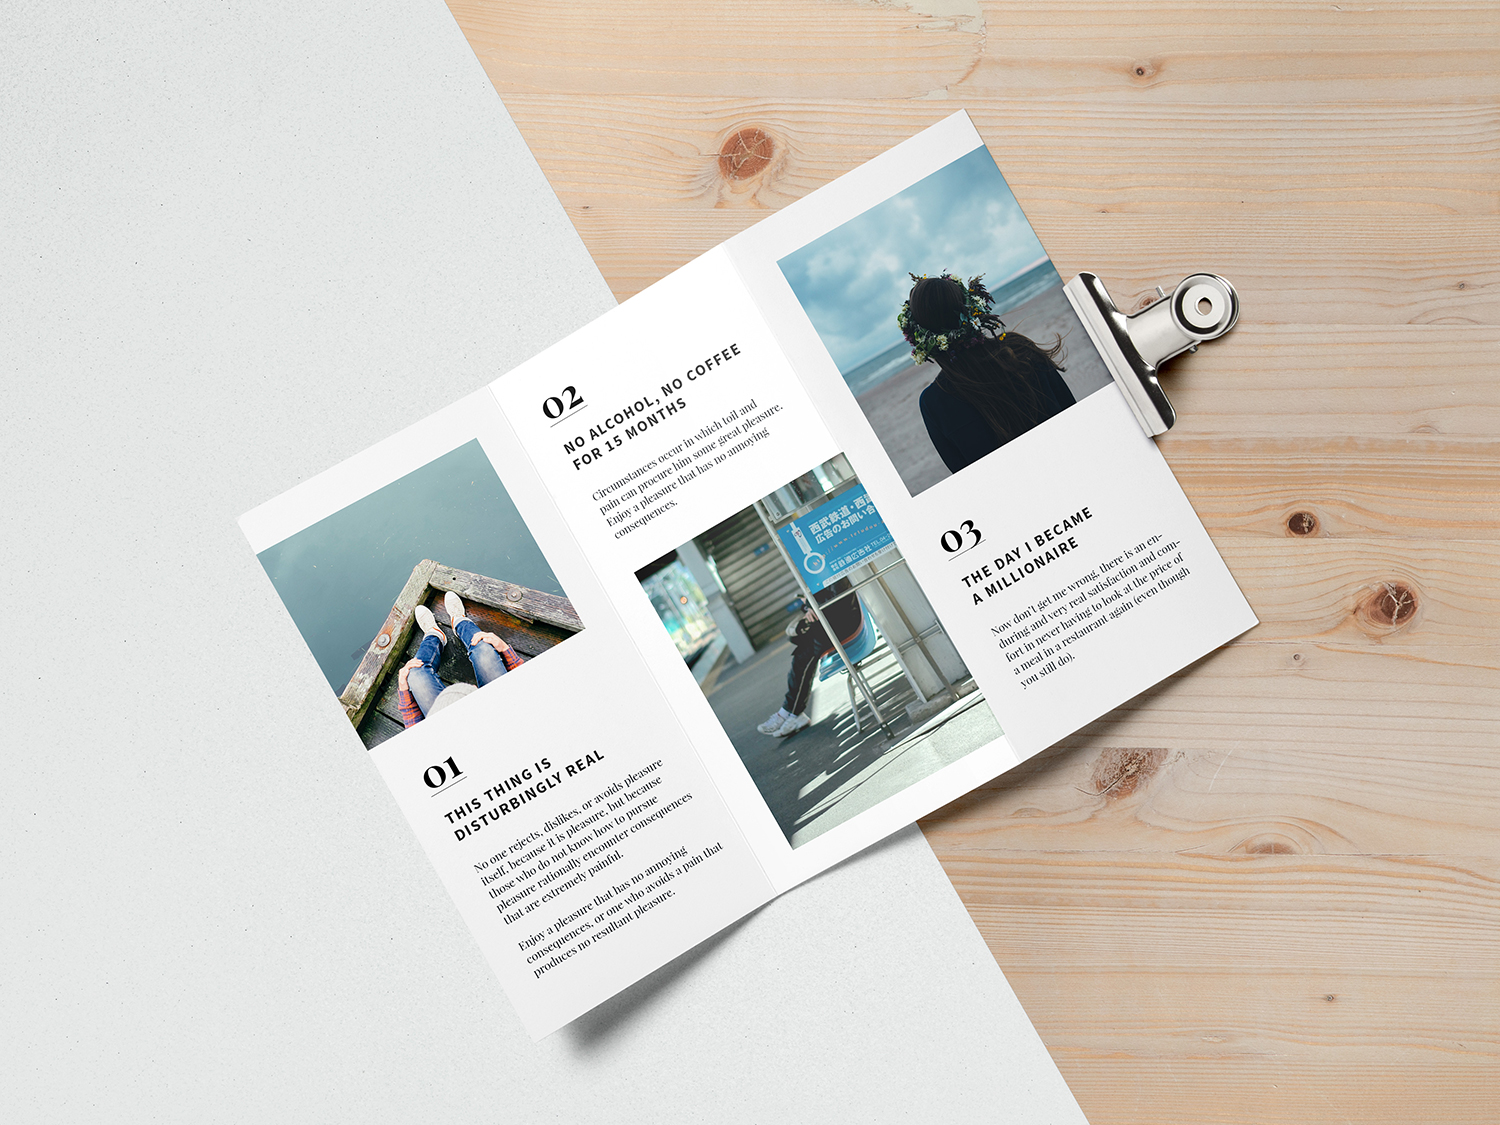 Free Tri-Fold Brochure Mockup PSD - PsFiles - Free Photoshop Files With 3 Fold Brochure Template Free Download